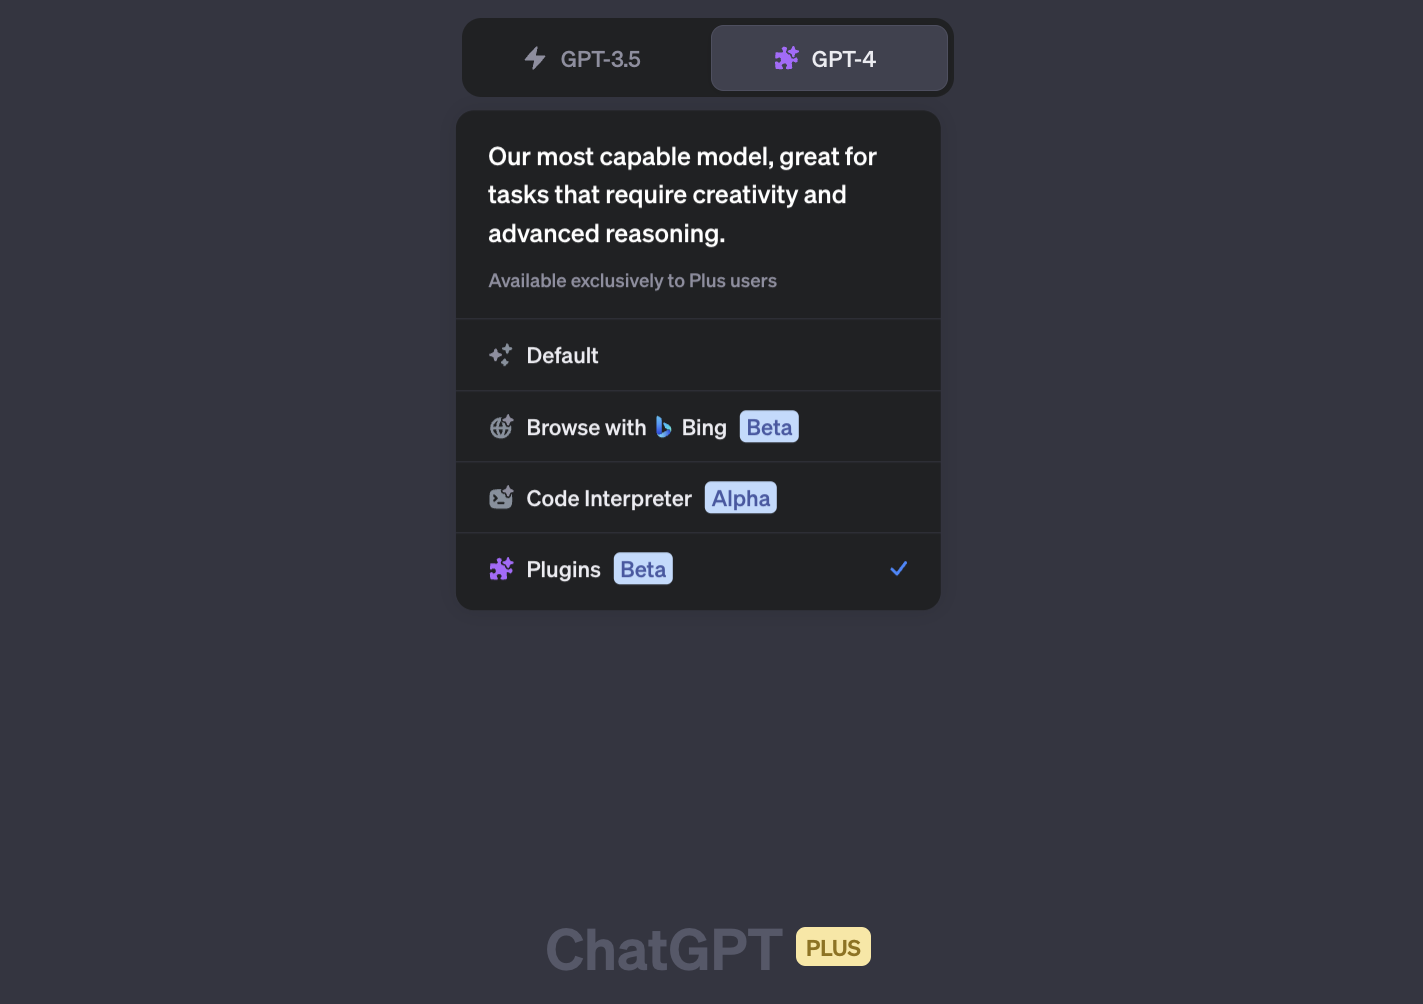 How To Use ChatGPT Plugins For Work